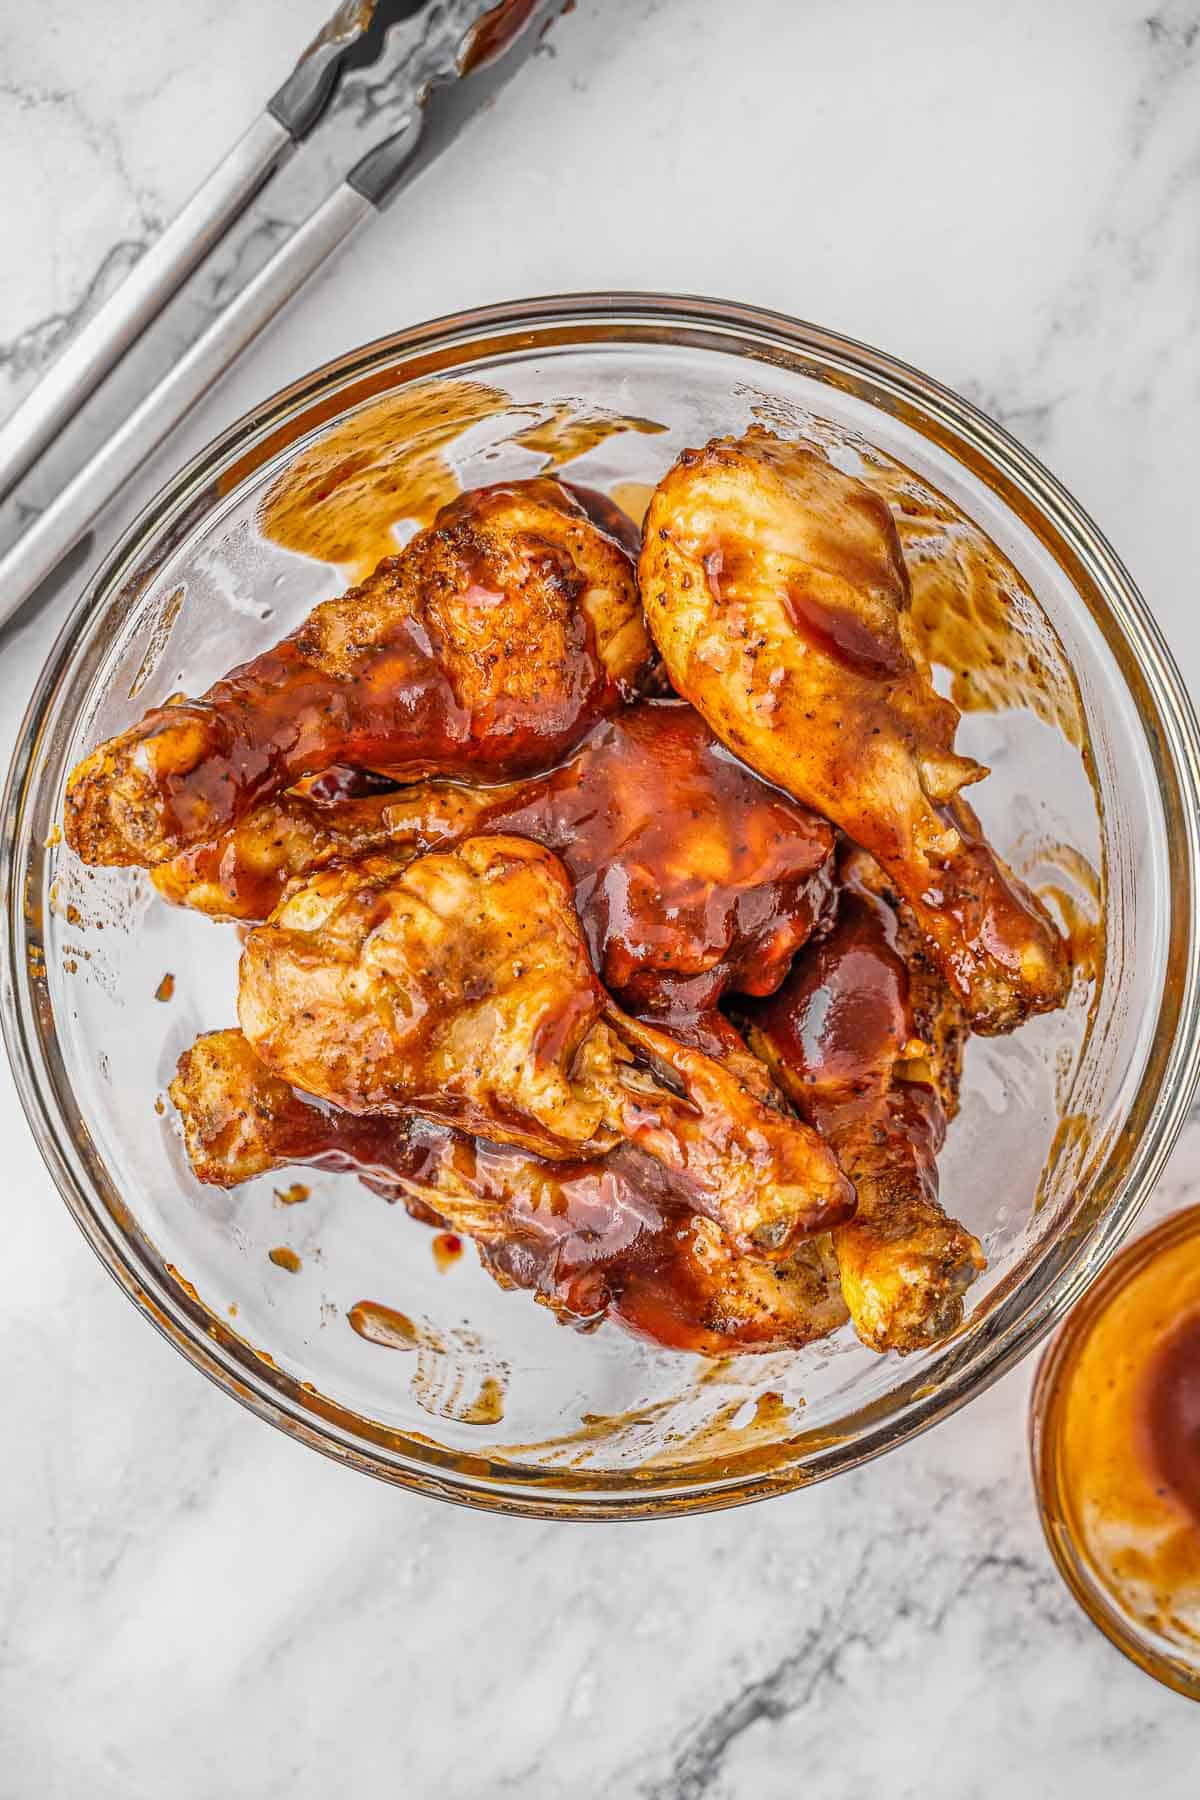 Chicken drumsticks tossed in BBQ sauce in glass bowl.